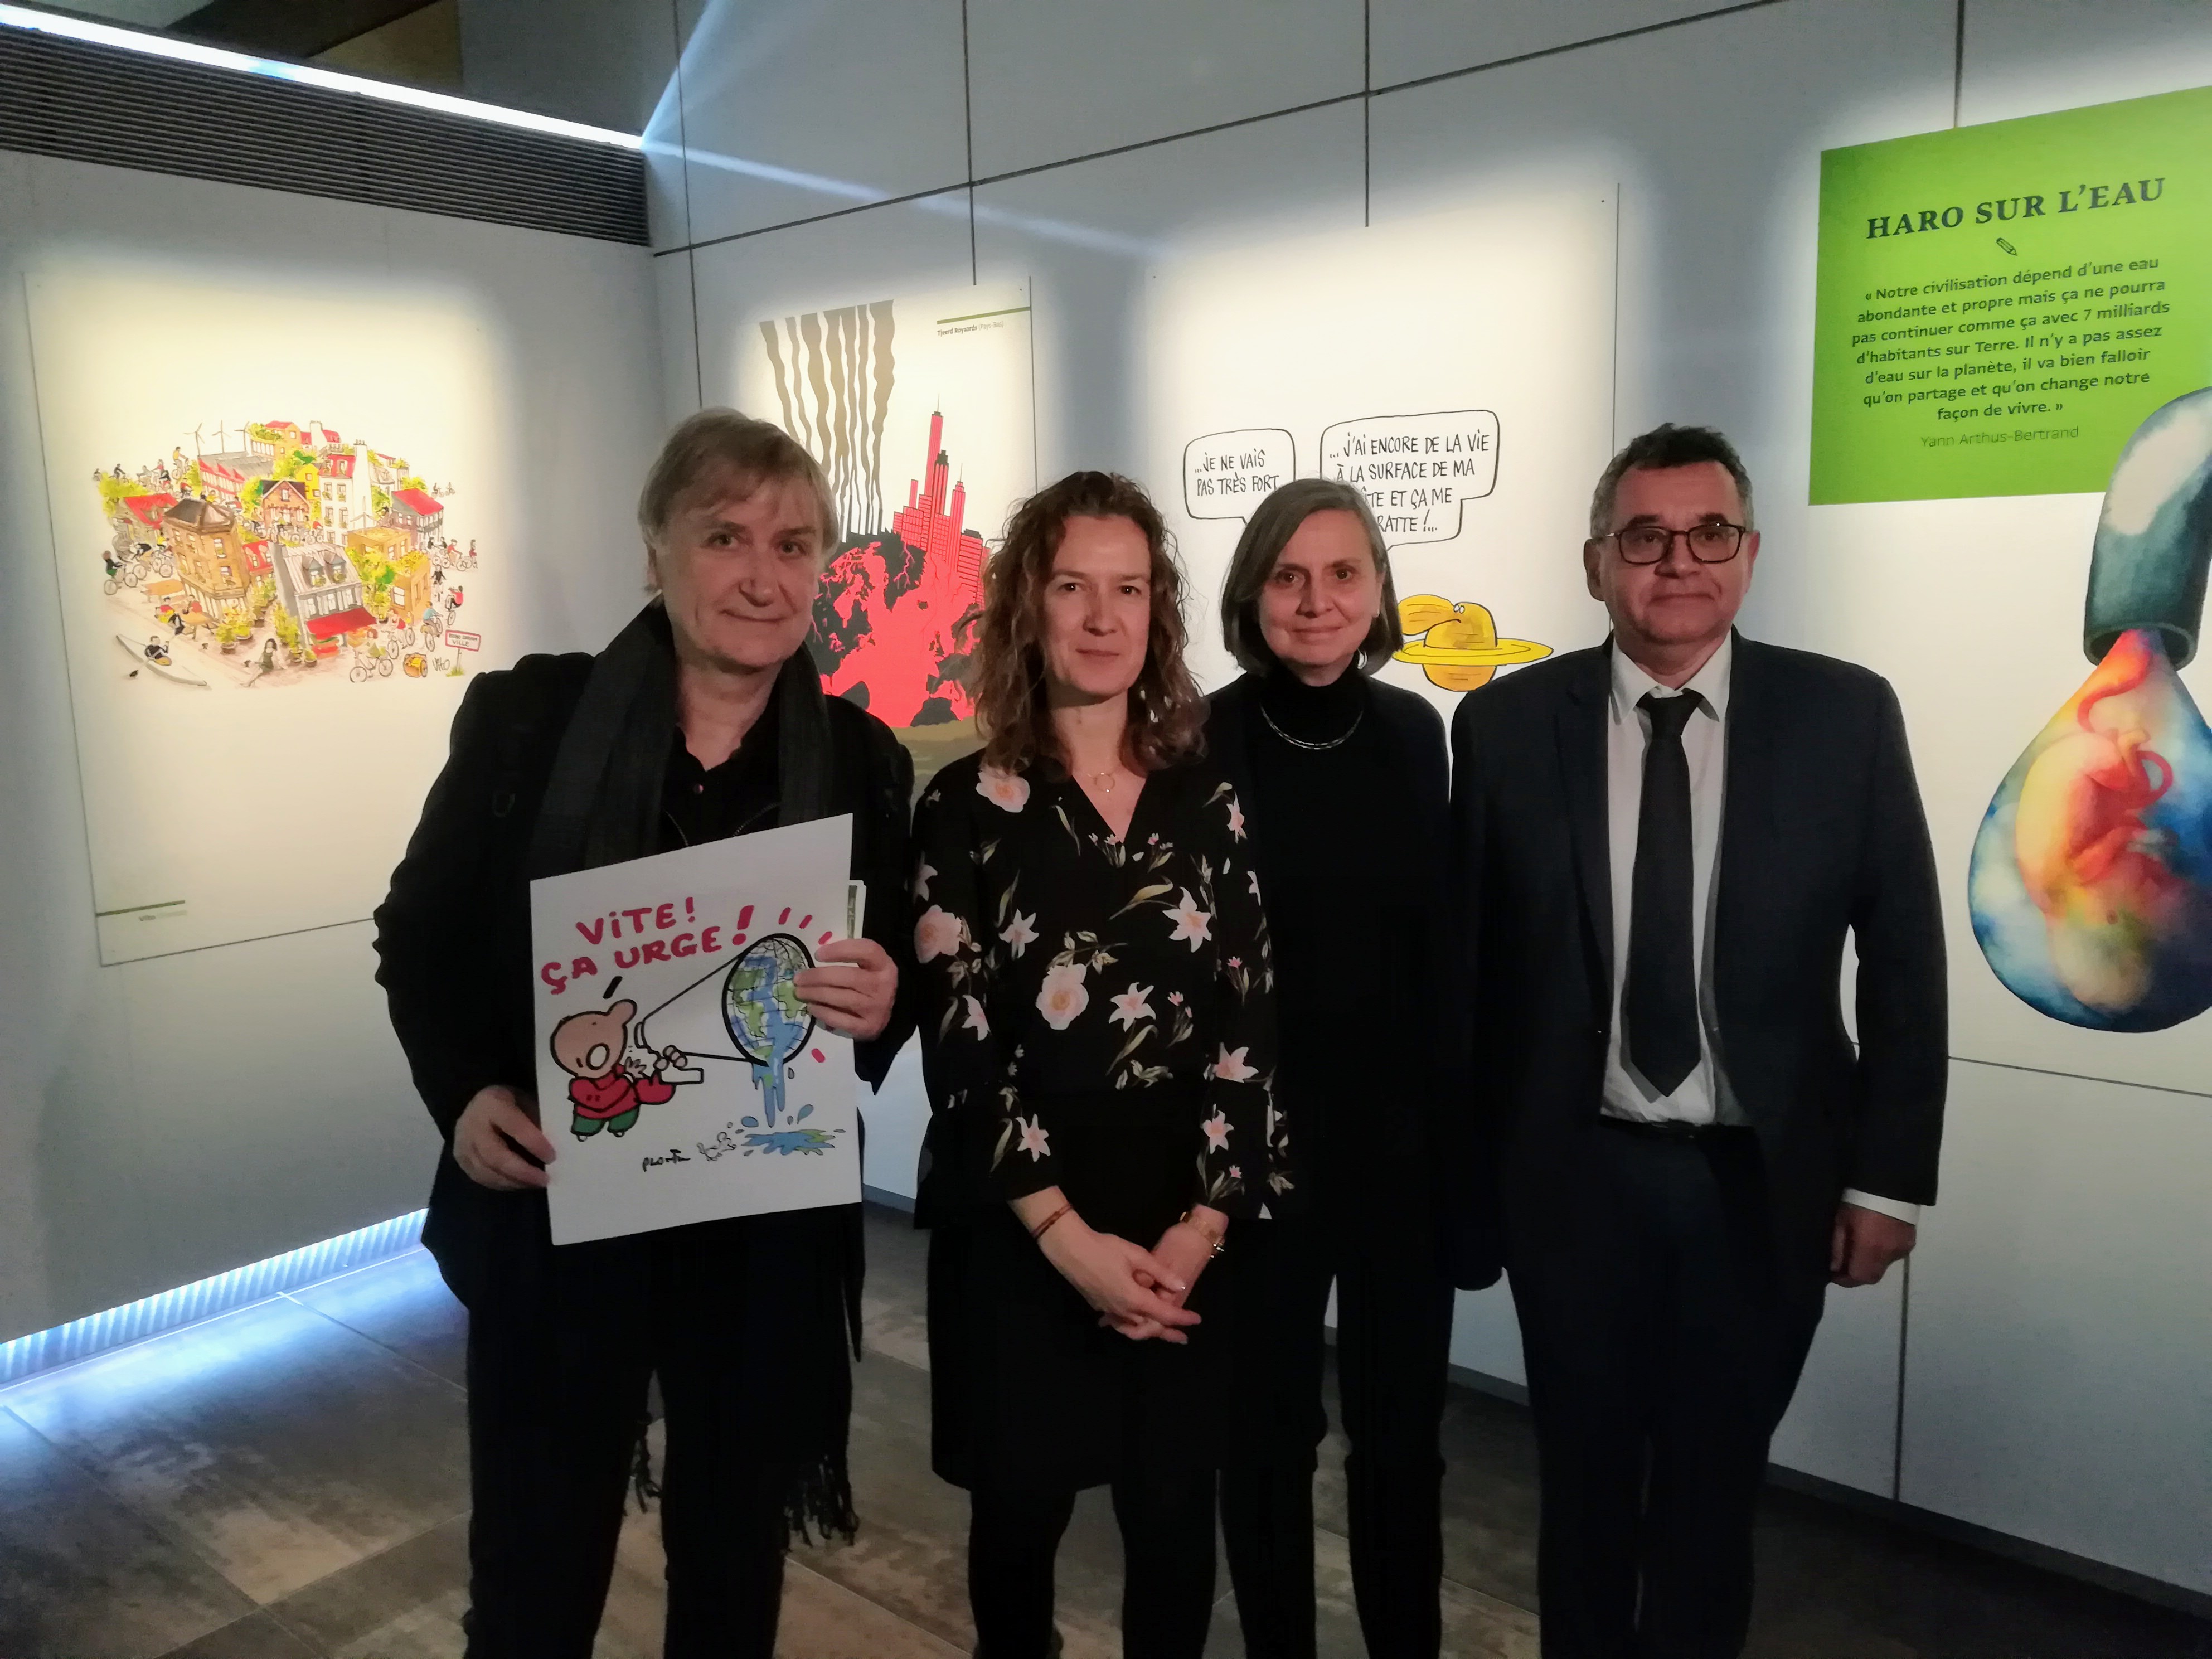 Opening of the exhibition « It’s getting warmer for the planet! » with Plantu, president of Cartooning for Peace, Sylvia Carbo Riveira, minister for Agriculture and Ecology  (Andorra), Jocelyne Caballero, French Ambassador in Andorra and Albert Moles, Fedacultura General Director